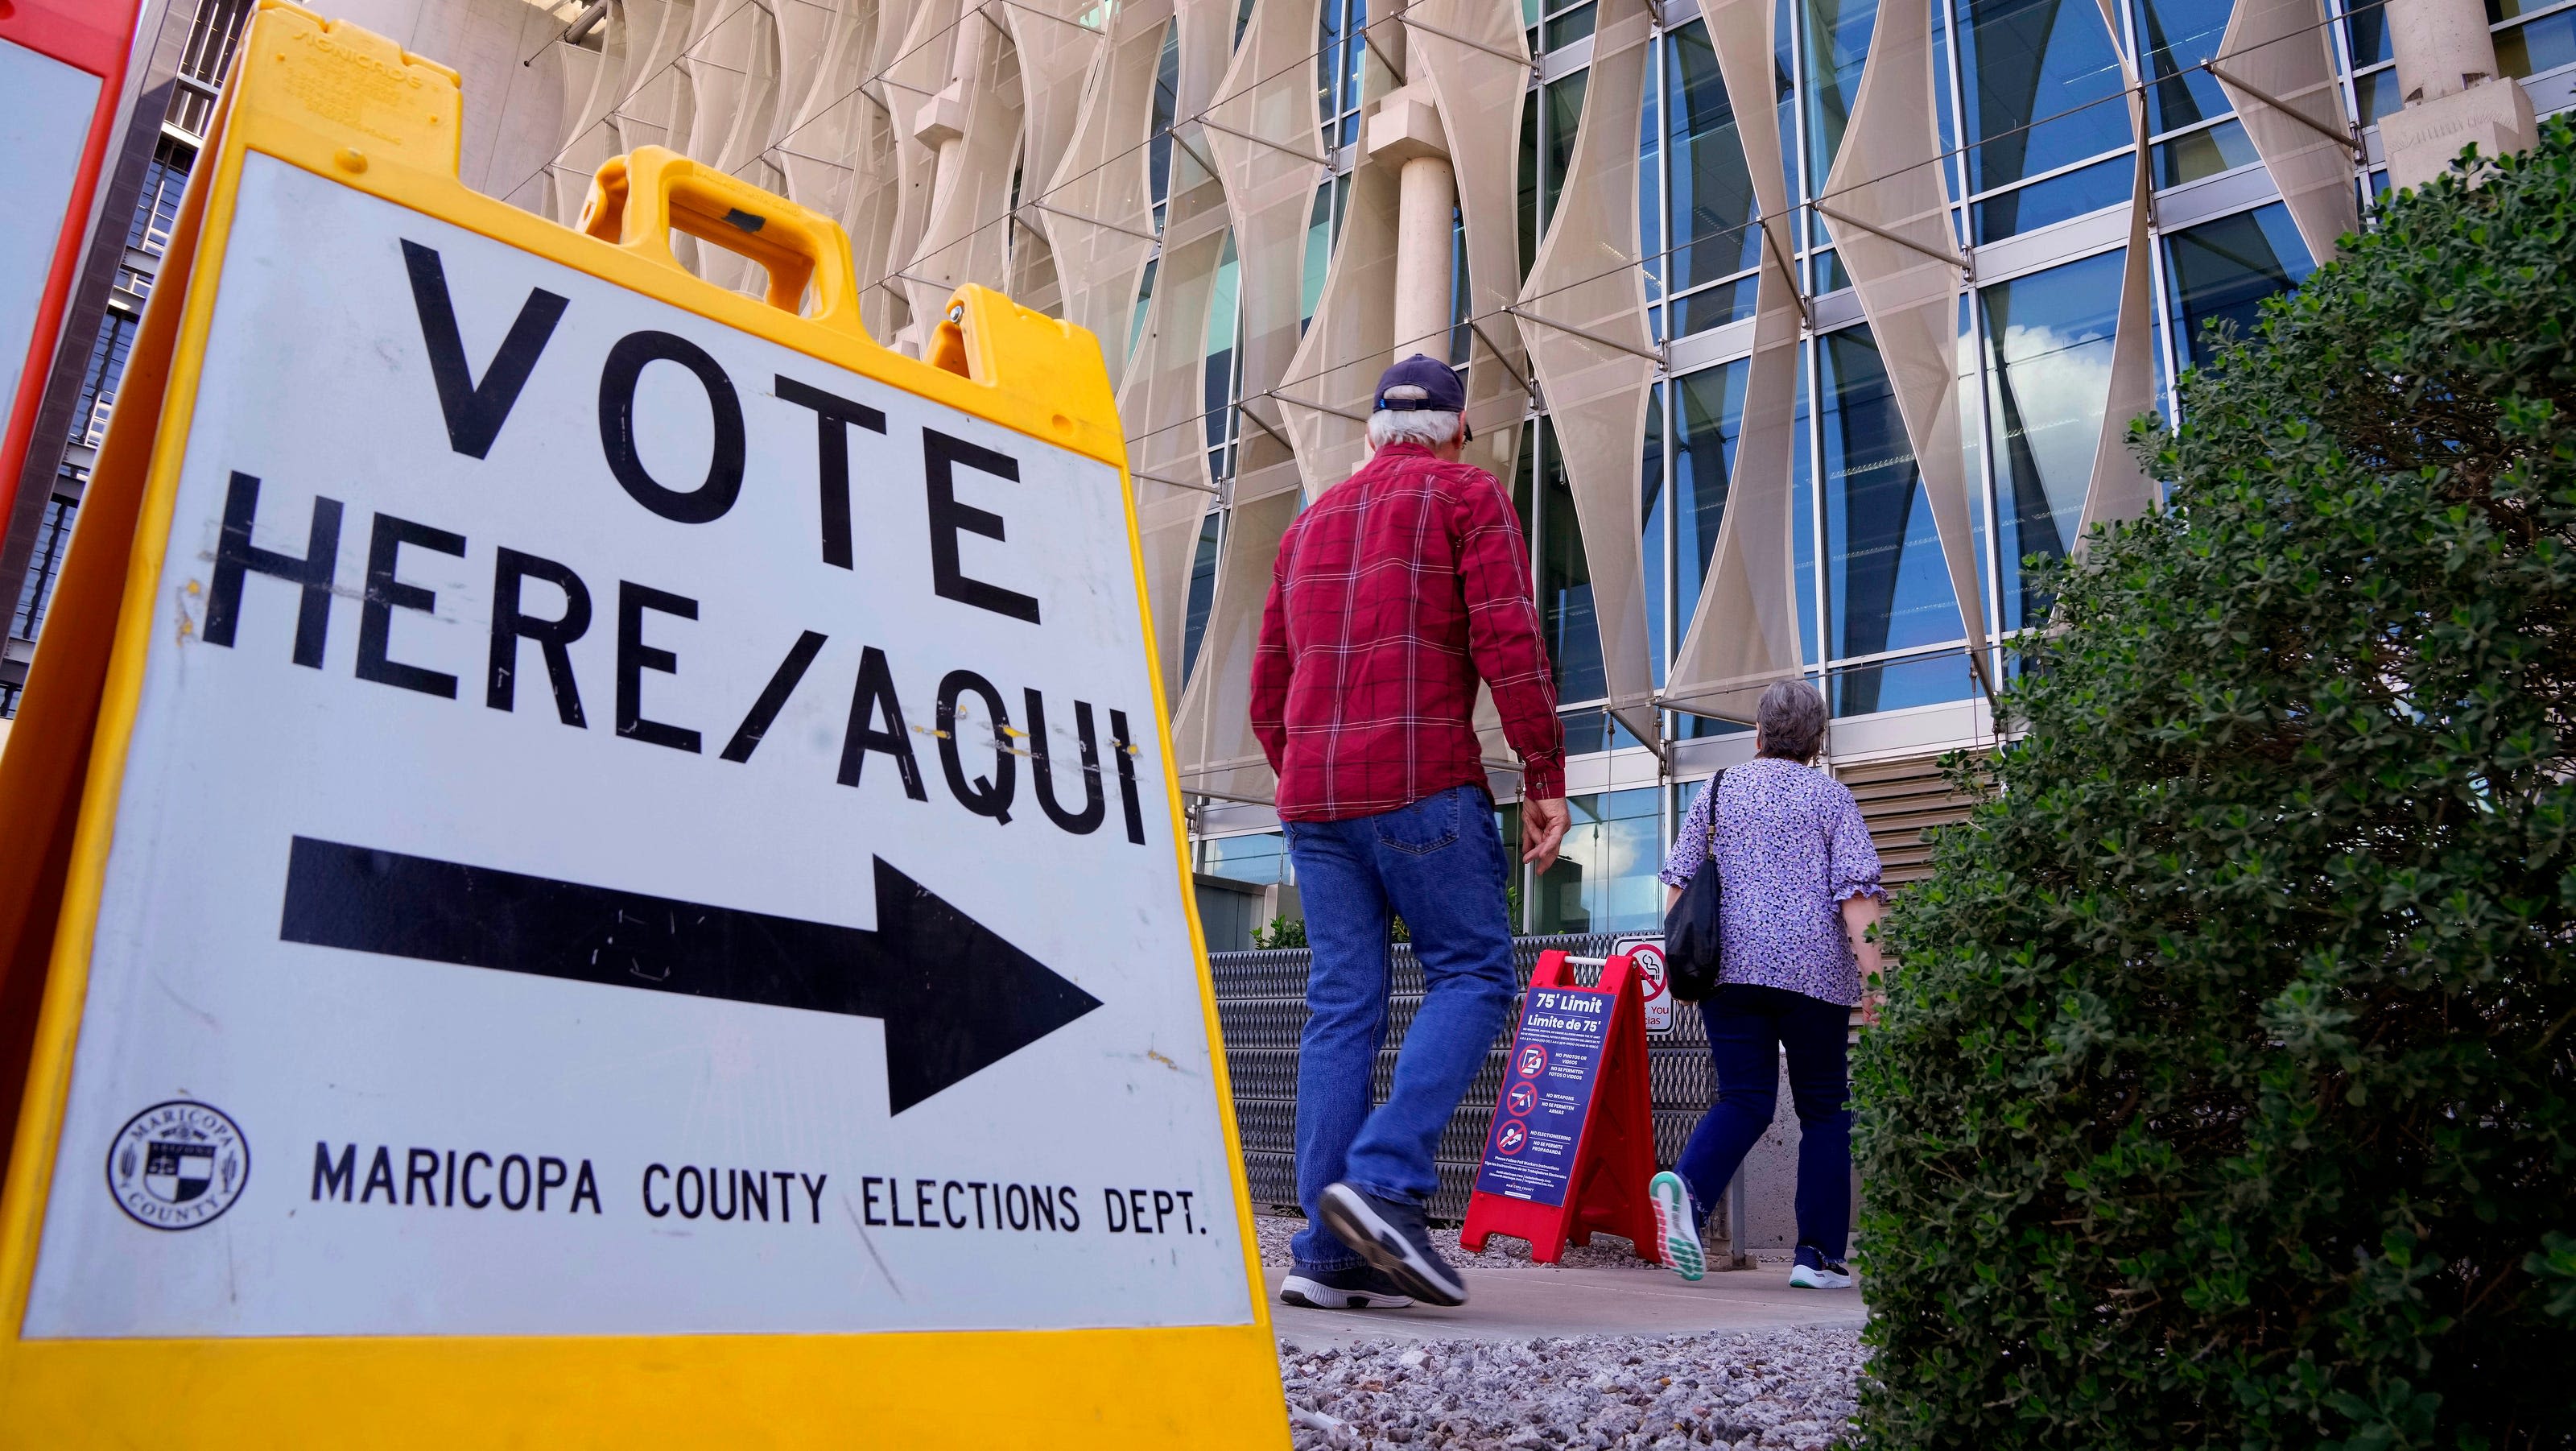 Are you an Arizona independent? Here's how to vote in the July 30 primary election